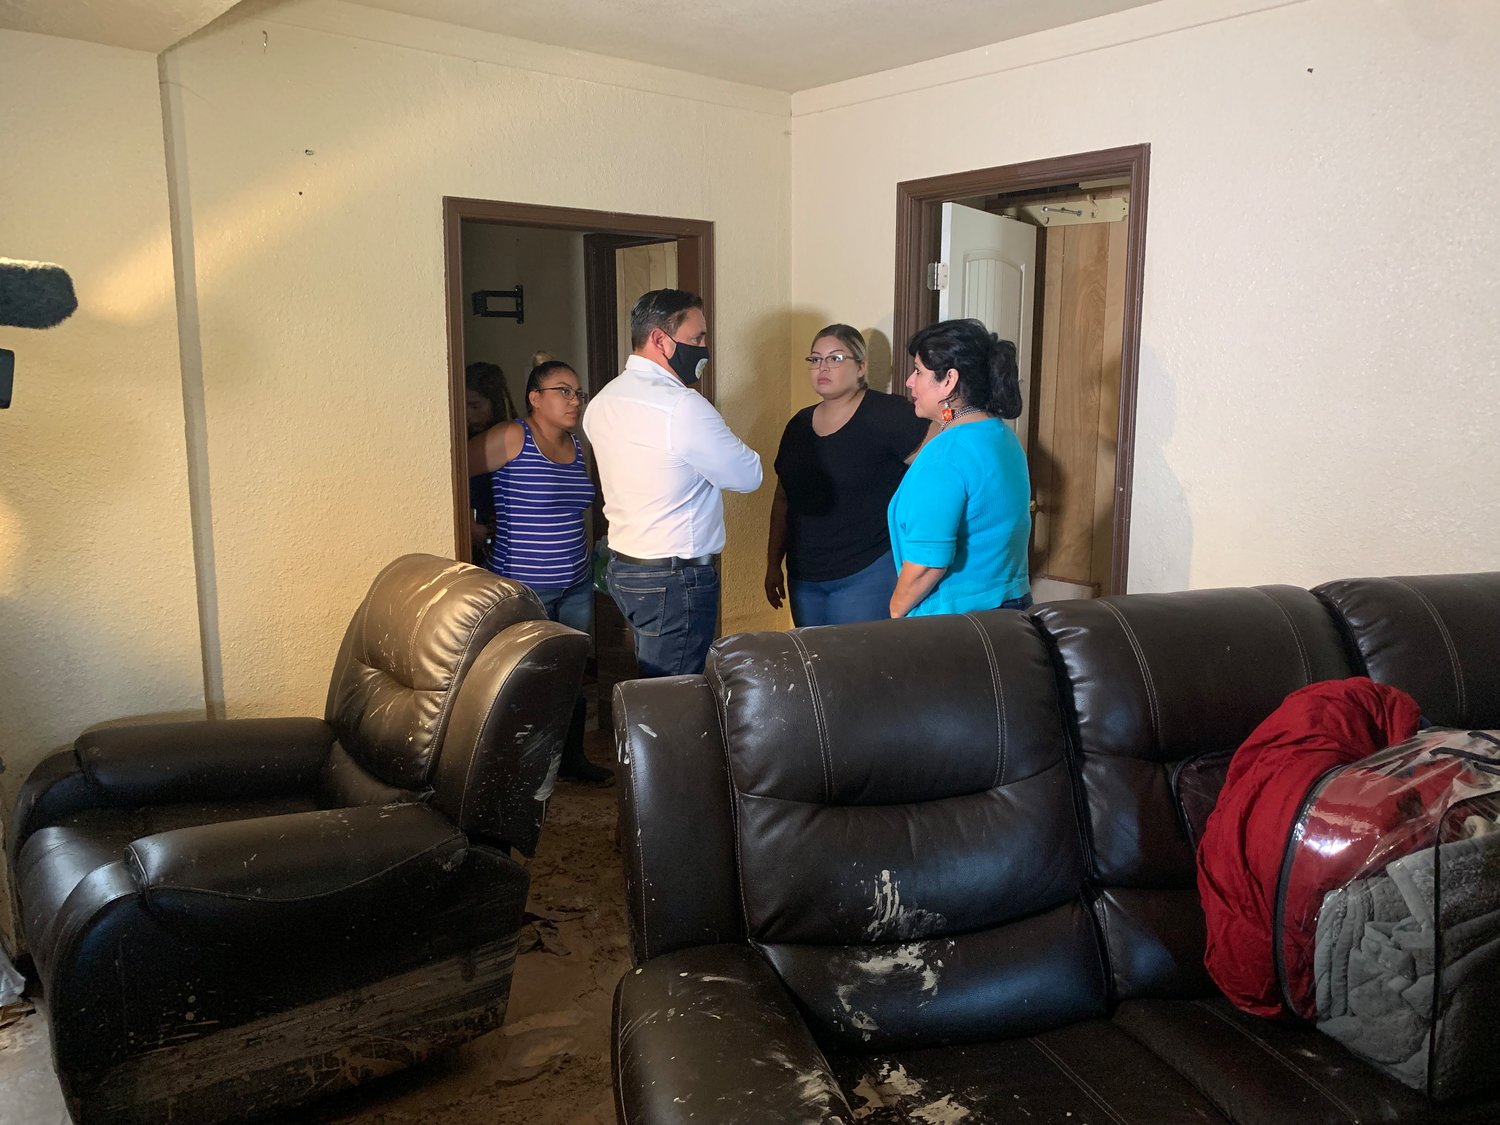 New Mexico Lt. Gov. Howie Morales, front left, and state Rep. Doreen Gallegos chat with Patricia Viramontes and Amber Aguirre in the living room of the mud-filled Aguirre home.